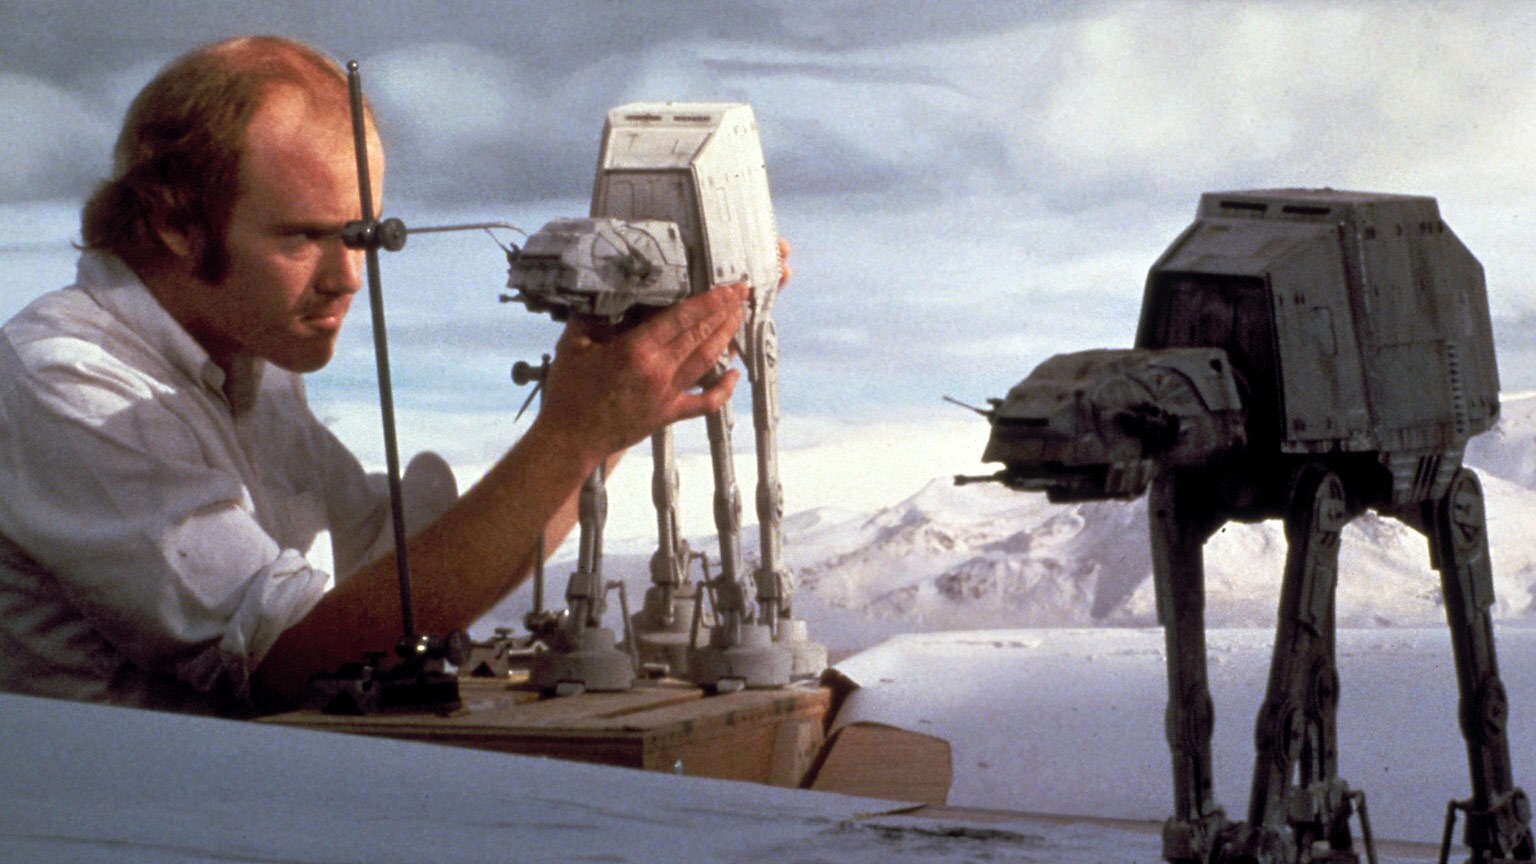 Much To Learn You Still Have: Four Things You Might Not Know About AT-ATs